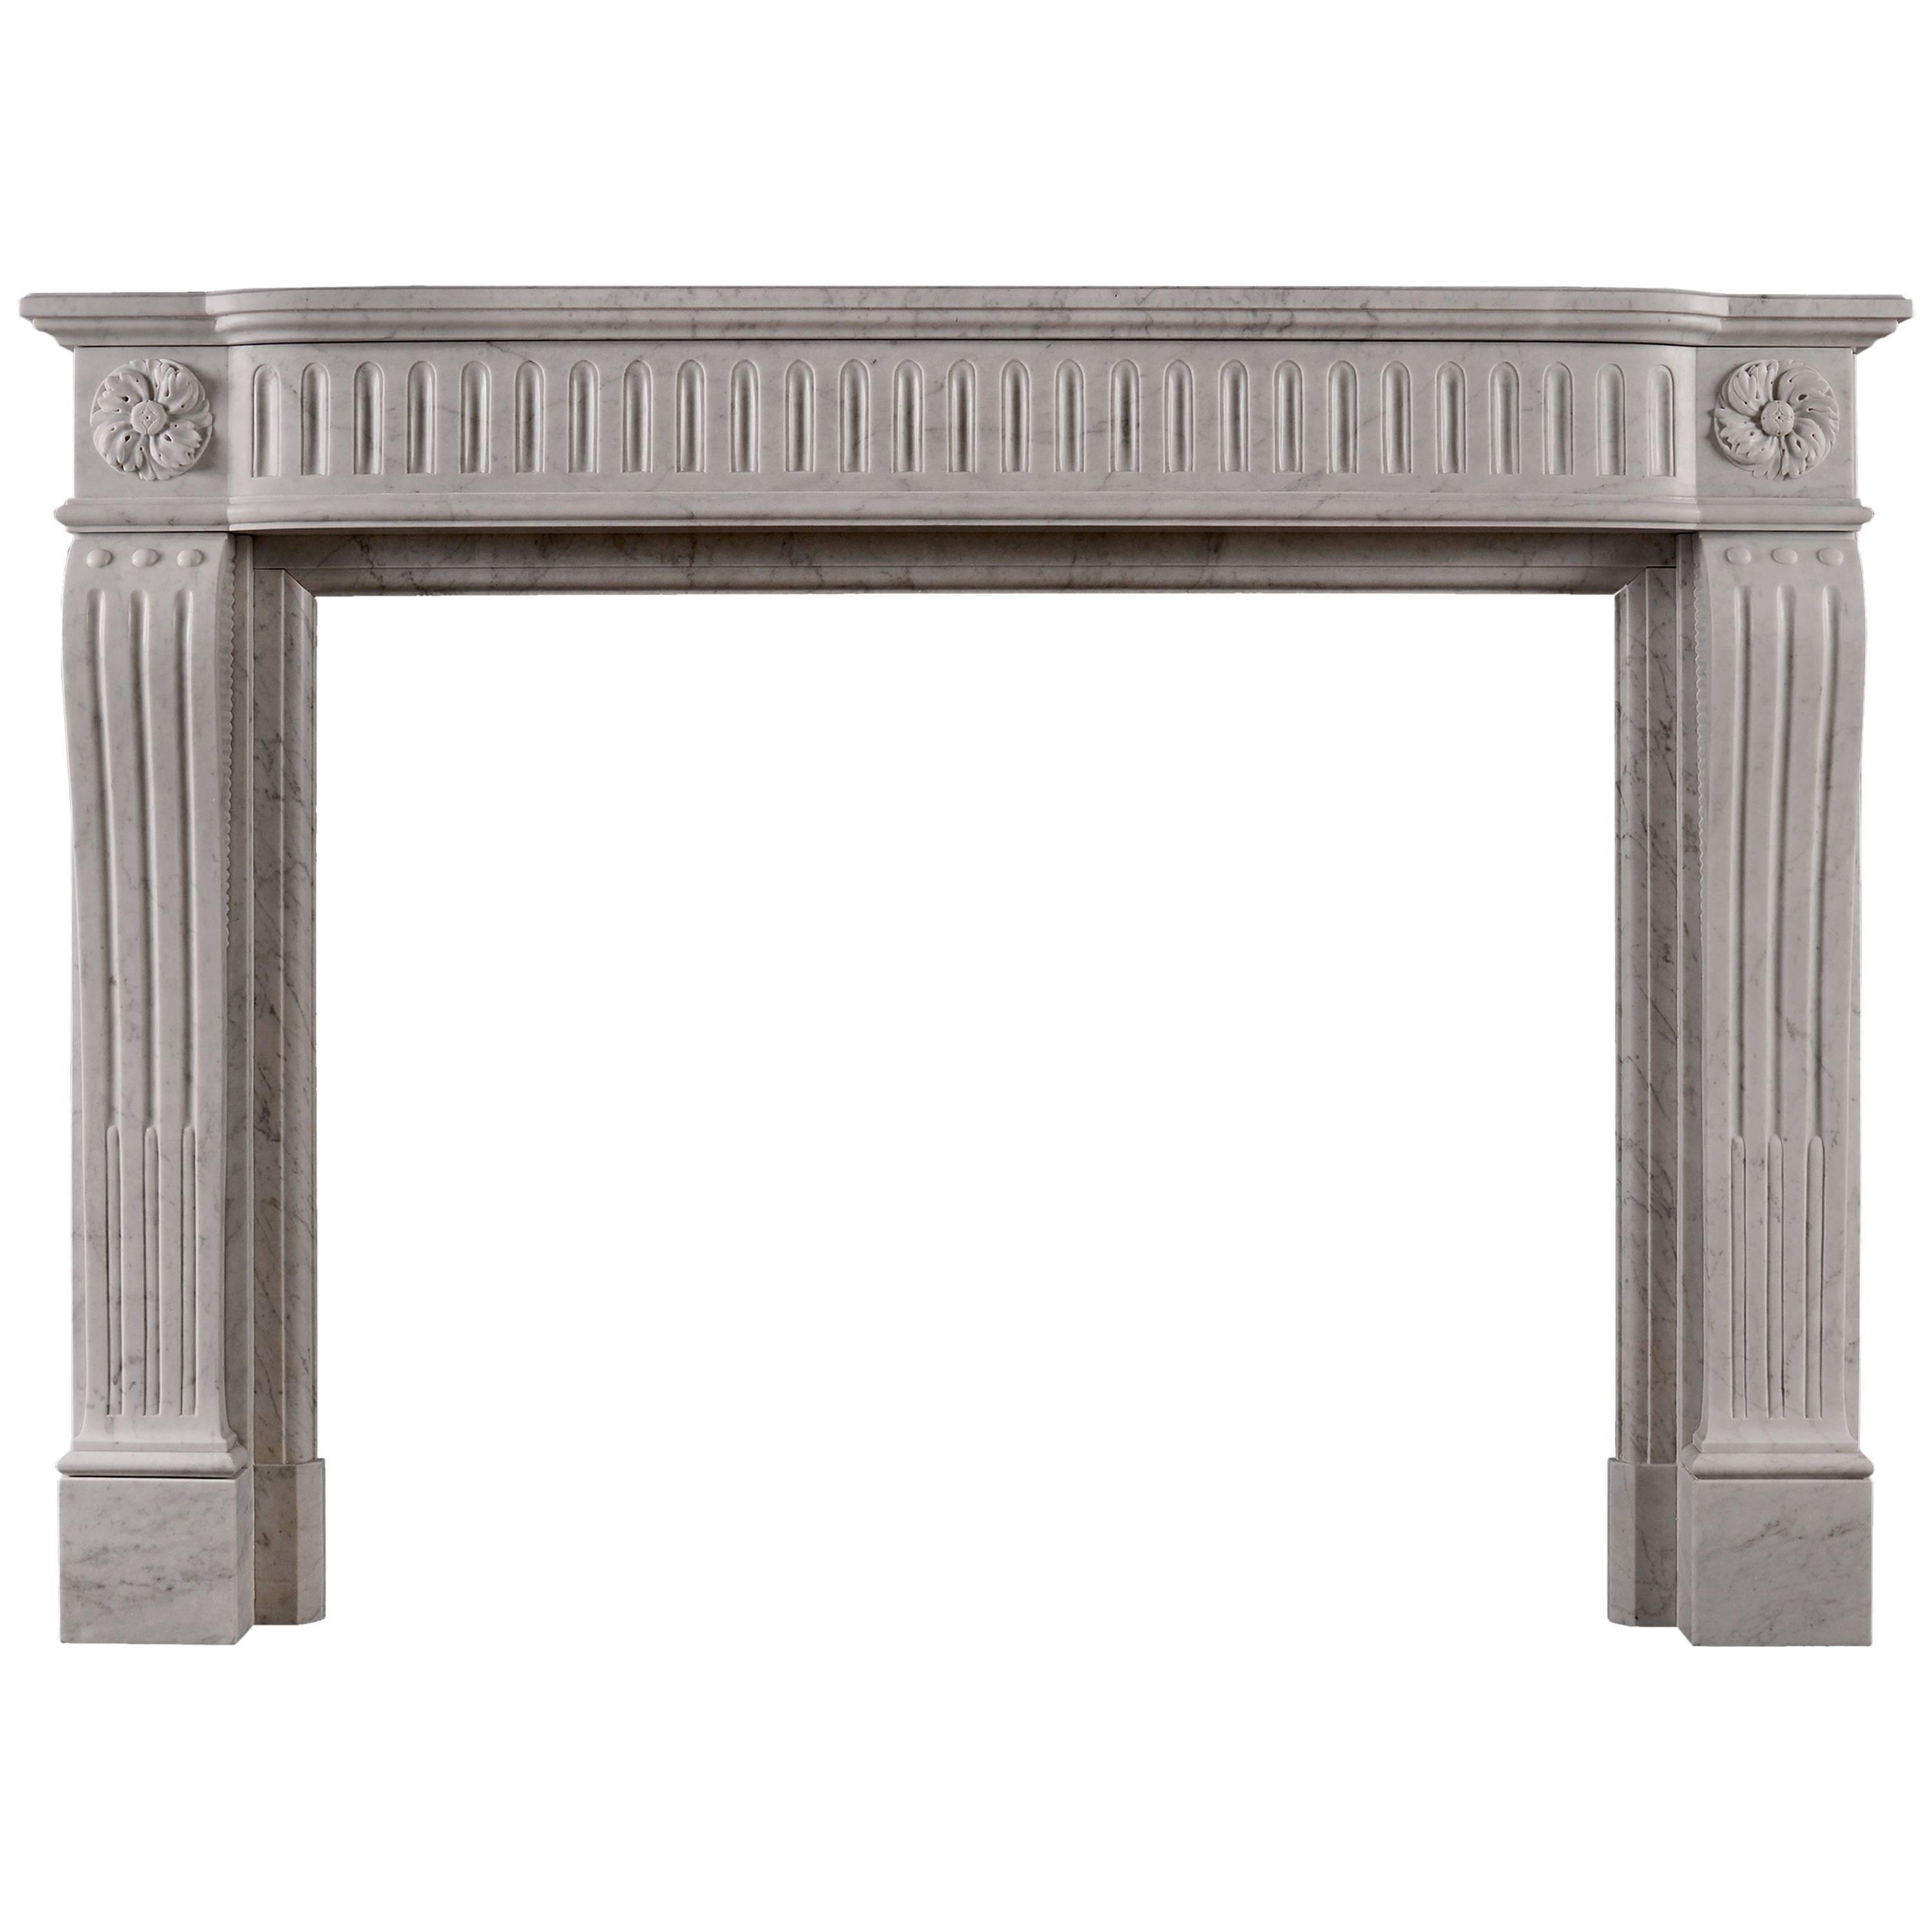 French Louis XV Style Fireplace in Italian Carrara For Sale